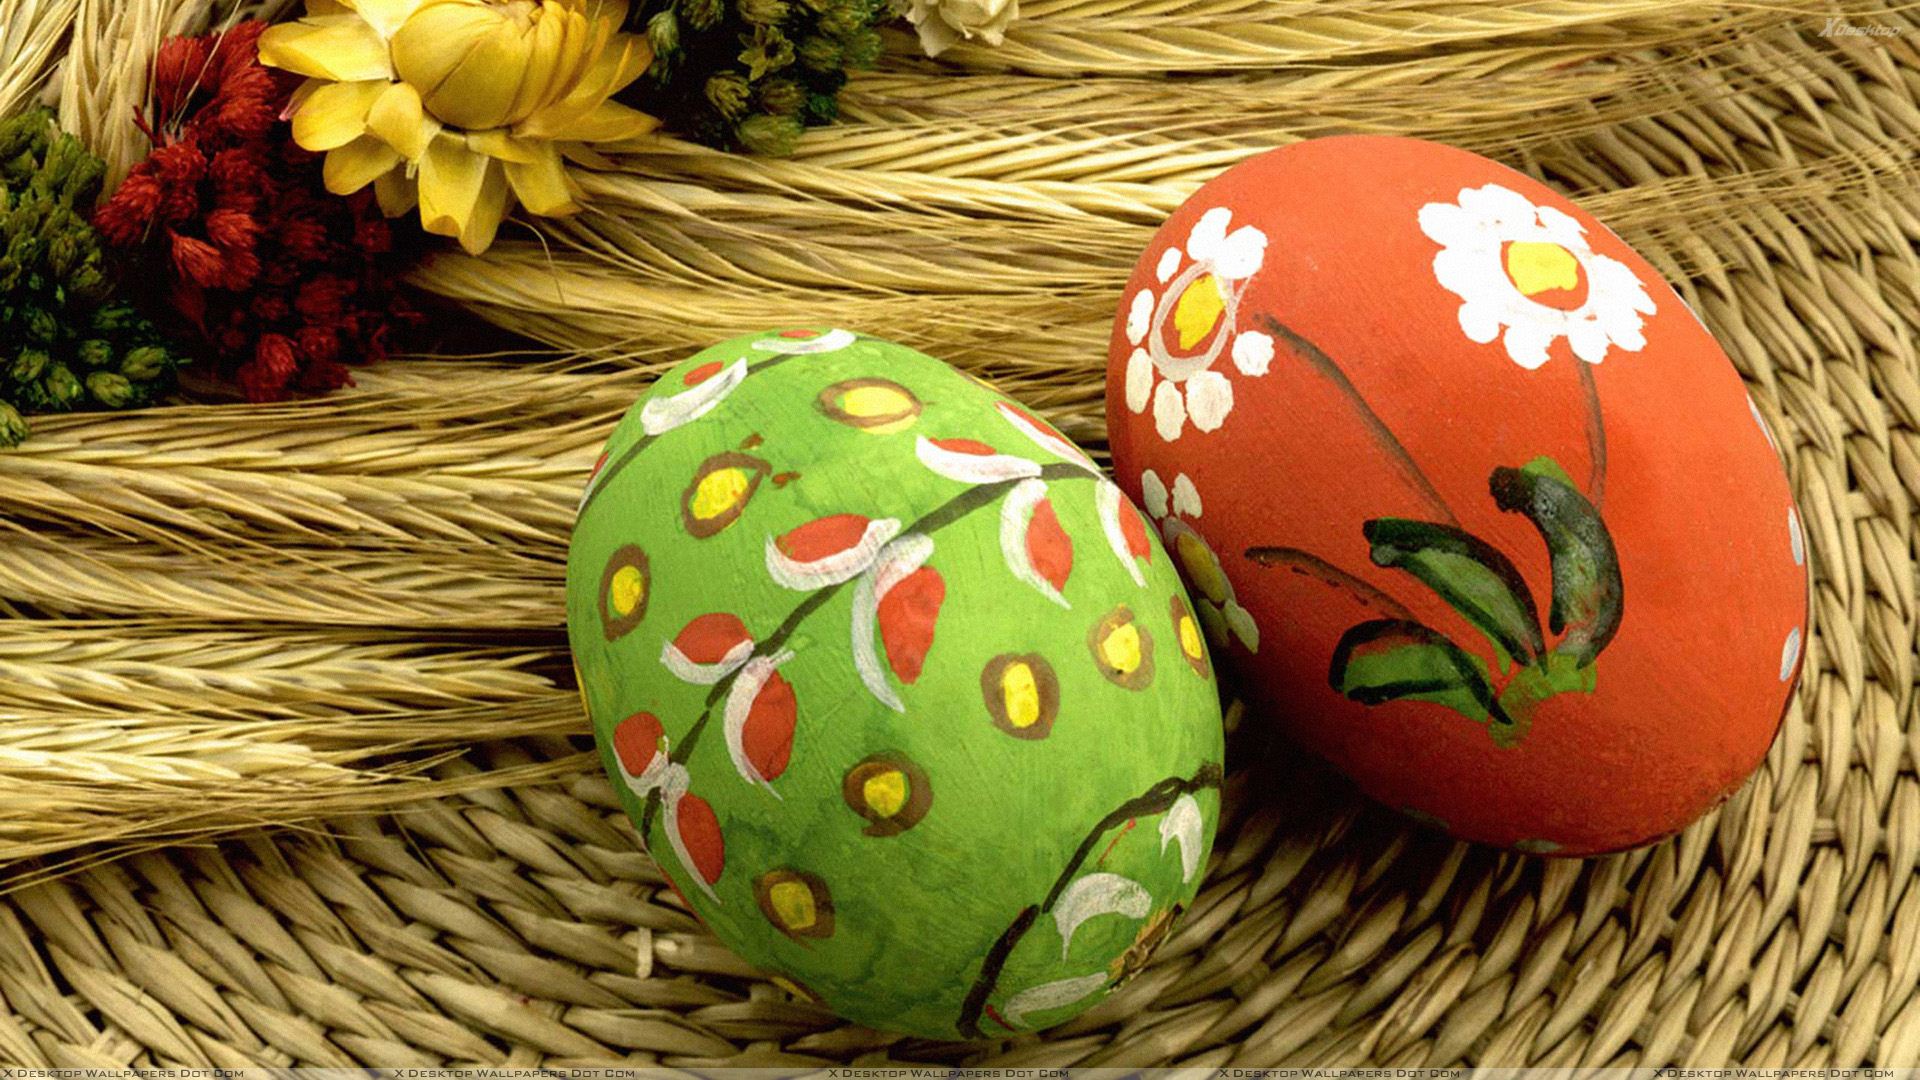 Art With Paint On Eggs Wallpaper